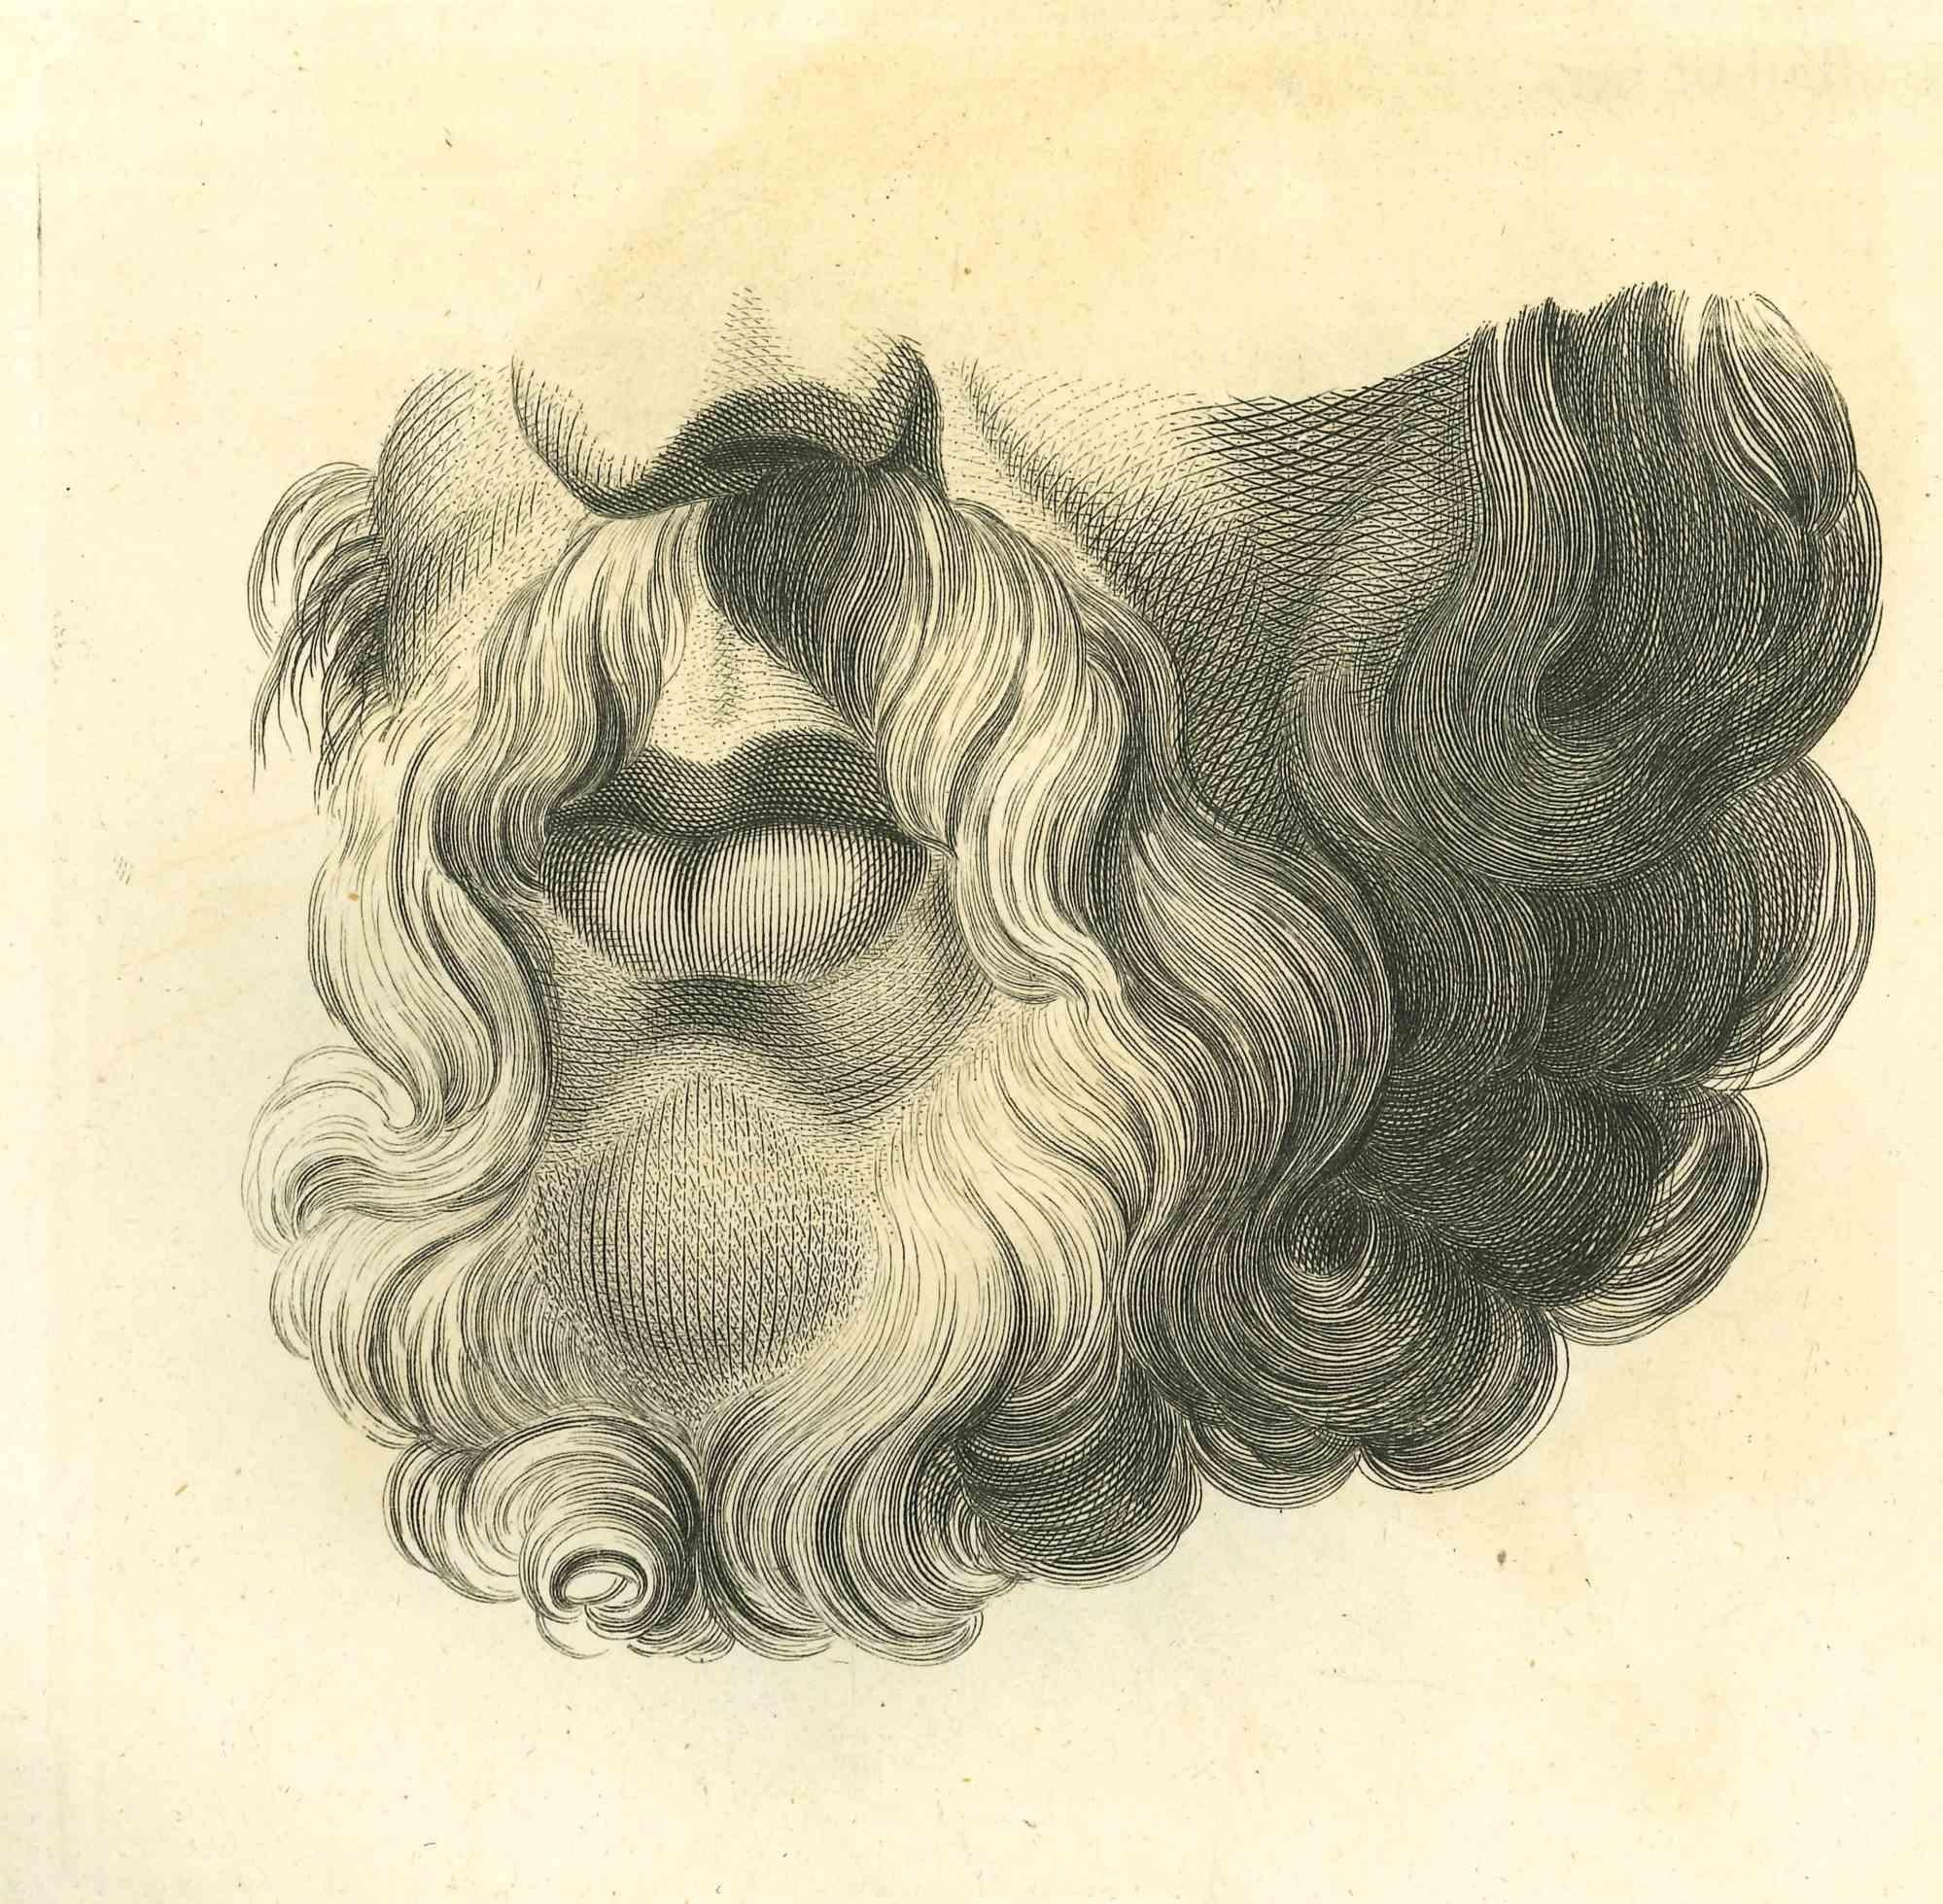 Lips Portrait is an original artwork realized by Thomas Holloway for Johann Caspar Lavater's  "Essays on Physiognomy, Designed to promote the Knowledge and the Love of Mankind", London, Bensley, 1810.

This artwork portrays a portrait of the lips of